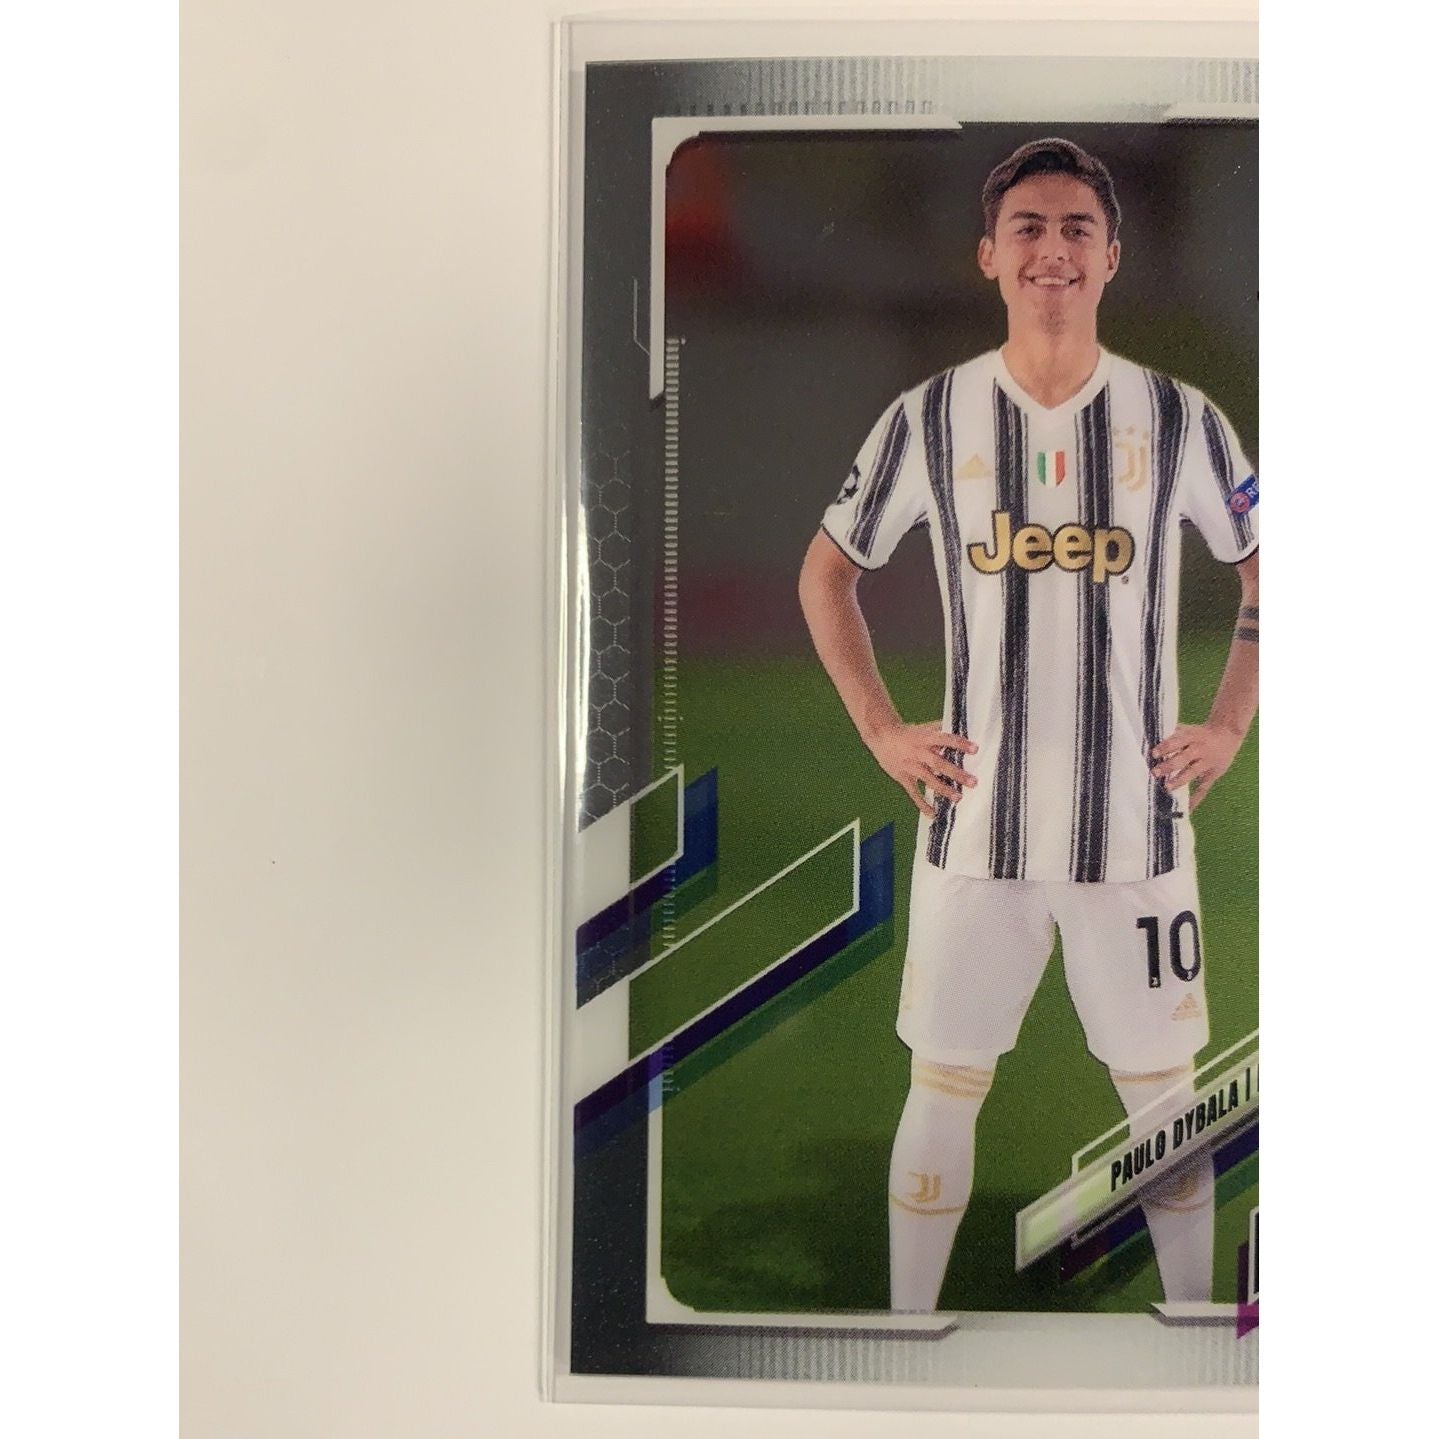  2021 Topps Chrome UEFA Champions League Paulo Dybala Base #47  Local Legends Cards & Collectibles